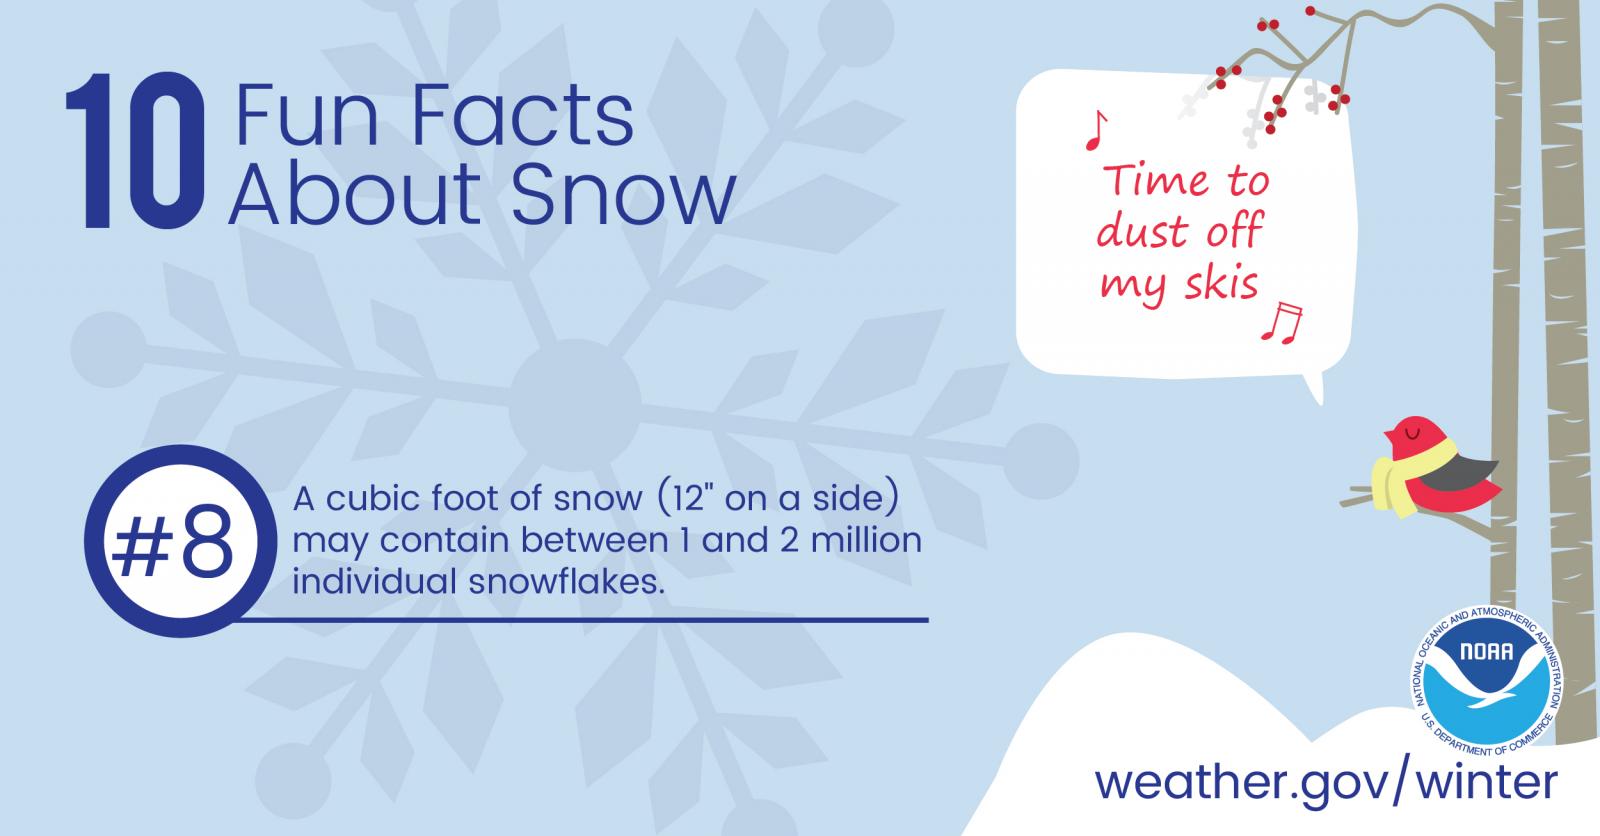 10 Fun Facts About Snow: #8. A cubic feet of snow (12 inches on a side) may contain between 1 and 2 million individual snowflakes.